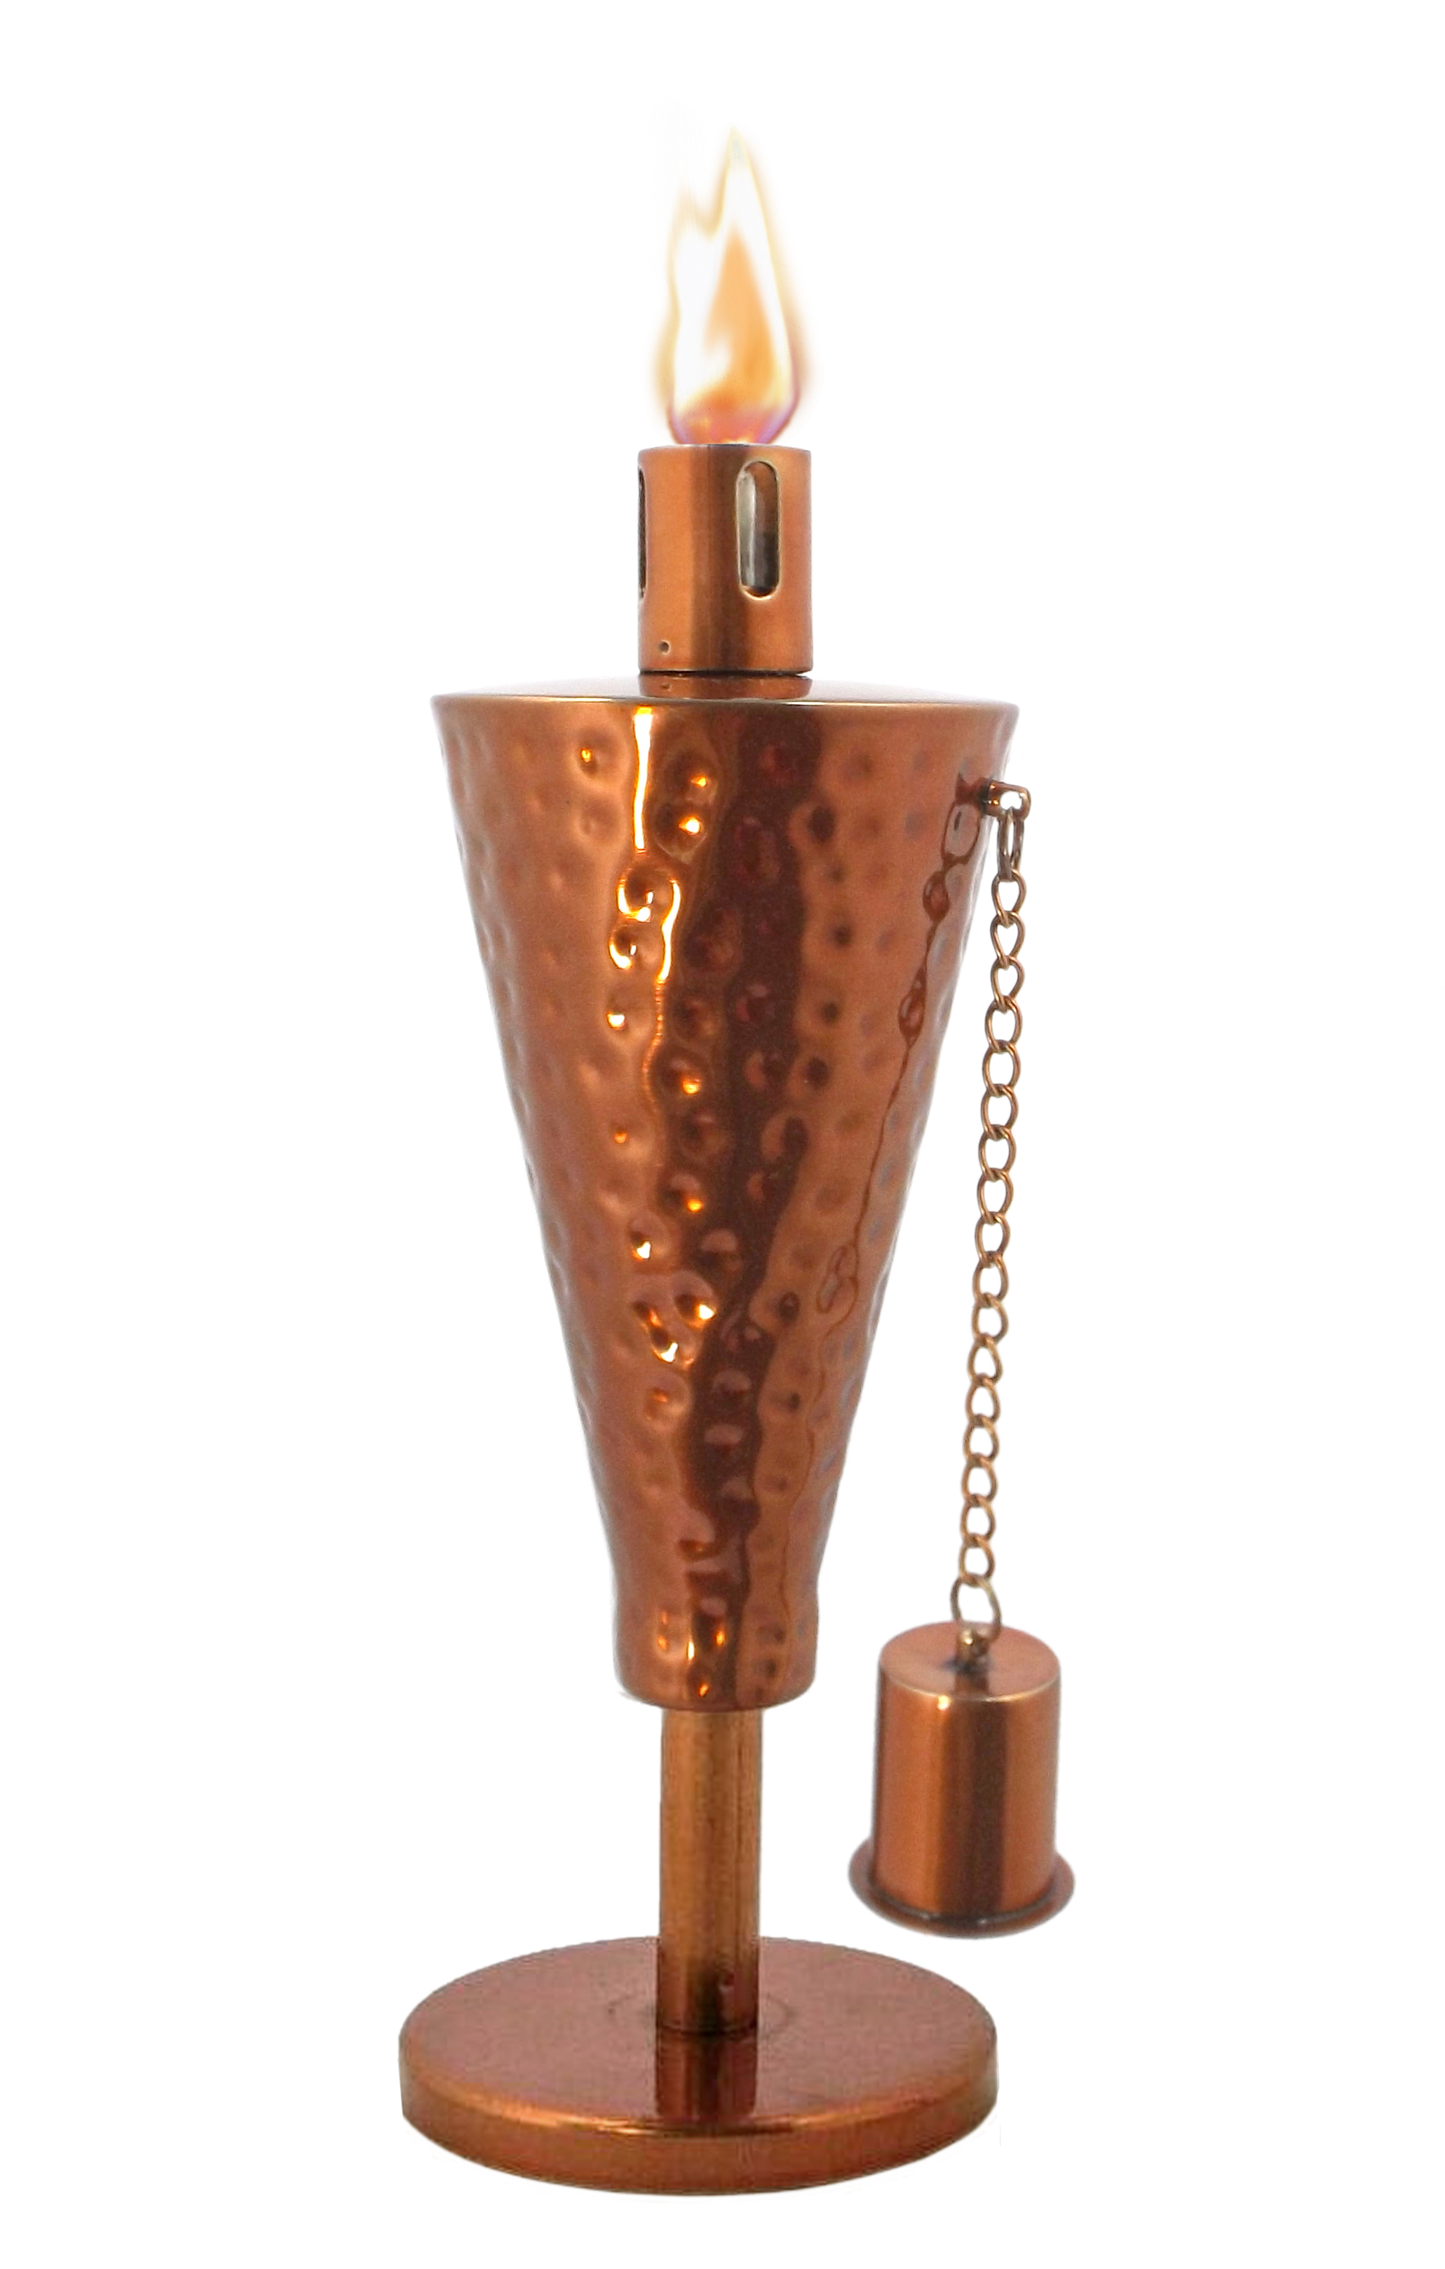 Anywhere Torch TableTop-Hammered Copper Cone (1 pc)